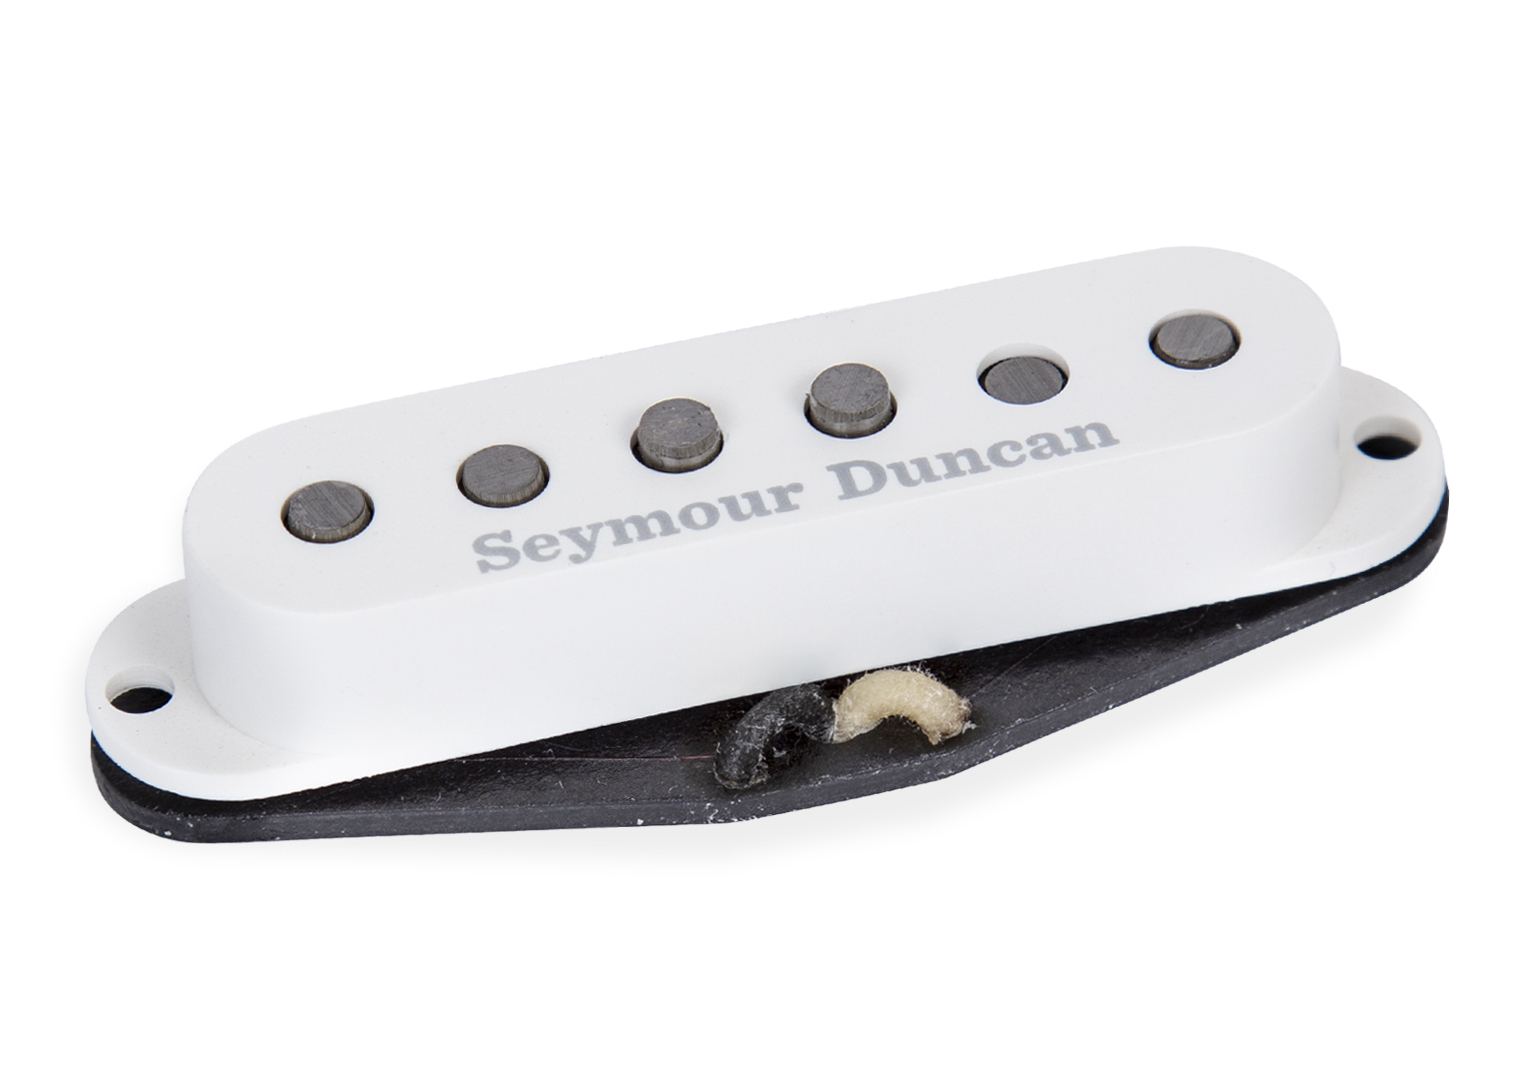 Seymour Duncan Scooped Strat - Middle RwRp Pickup - White